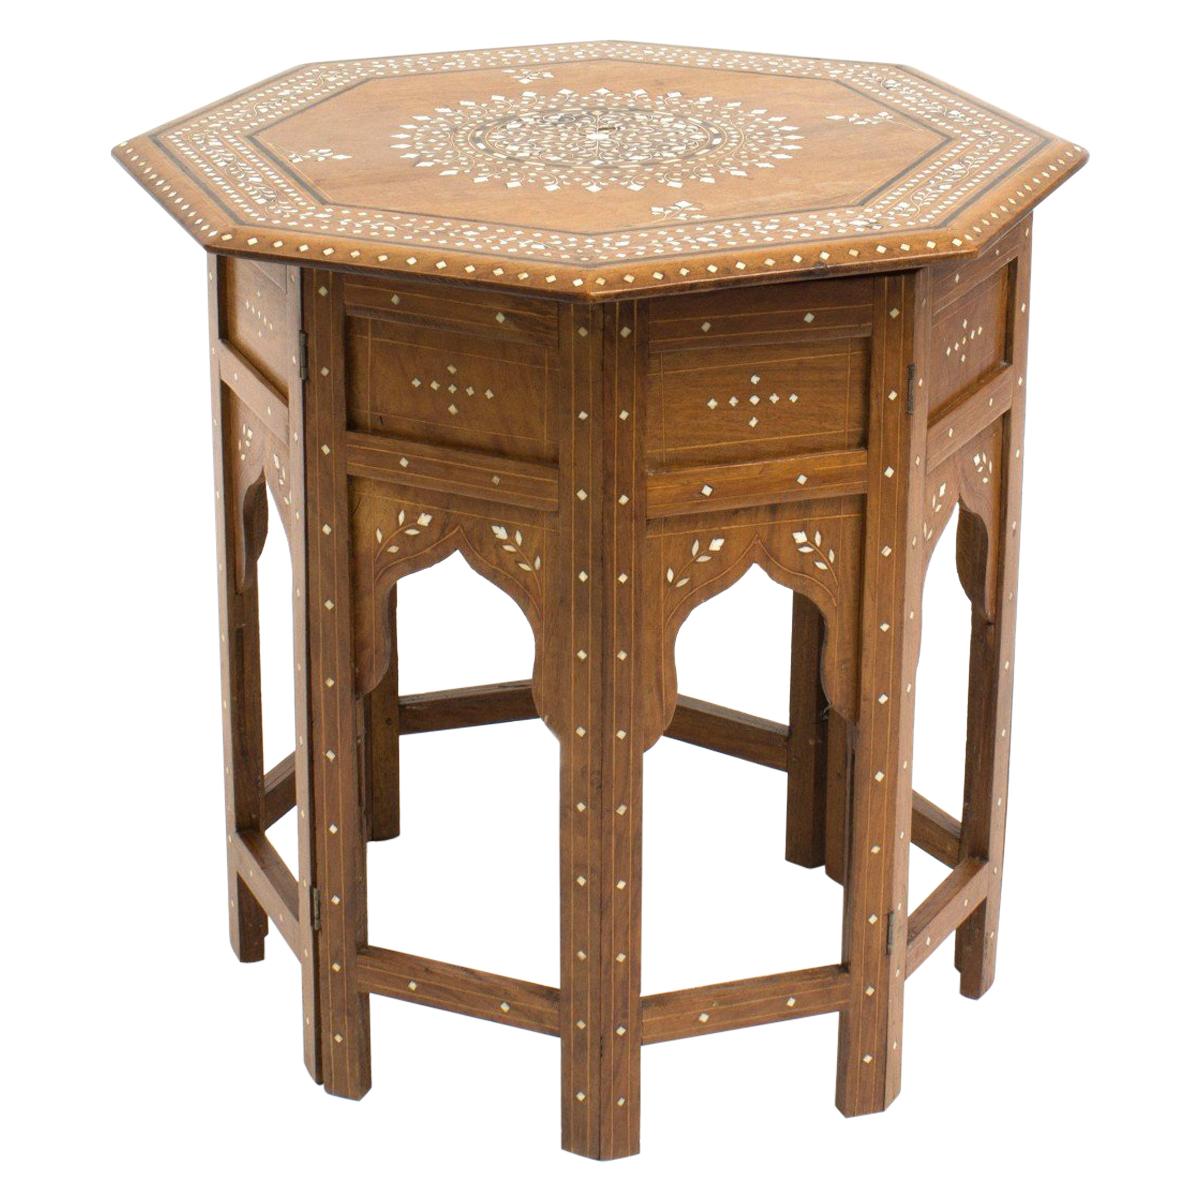 Anglo-Indian Octagonal Side Table